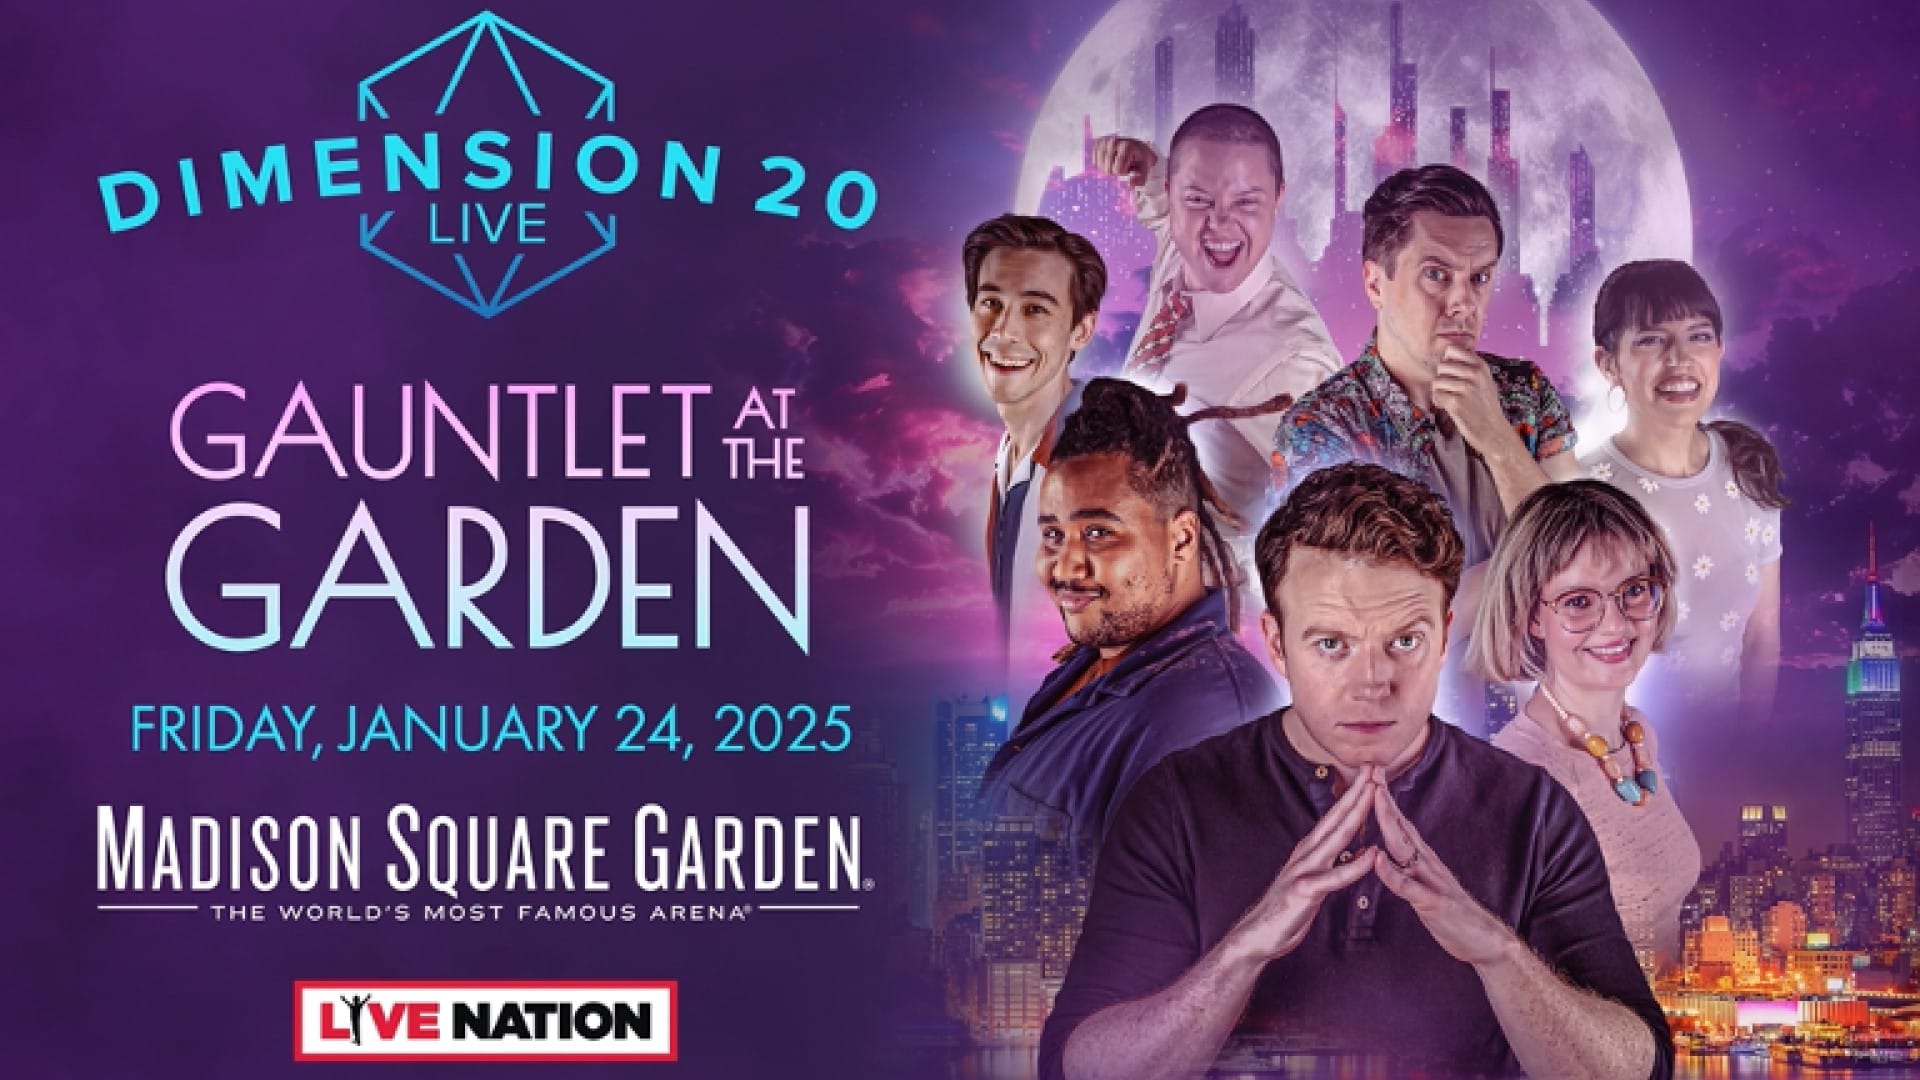 Dimension 20: Gauntlet At The Garden Rolls The Dice At Madison Square Garden